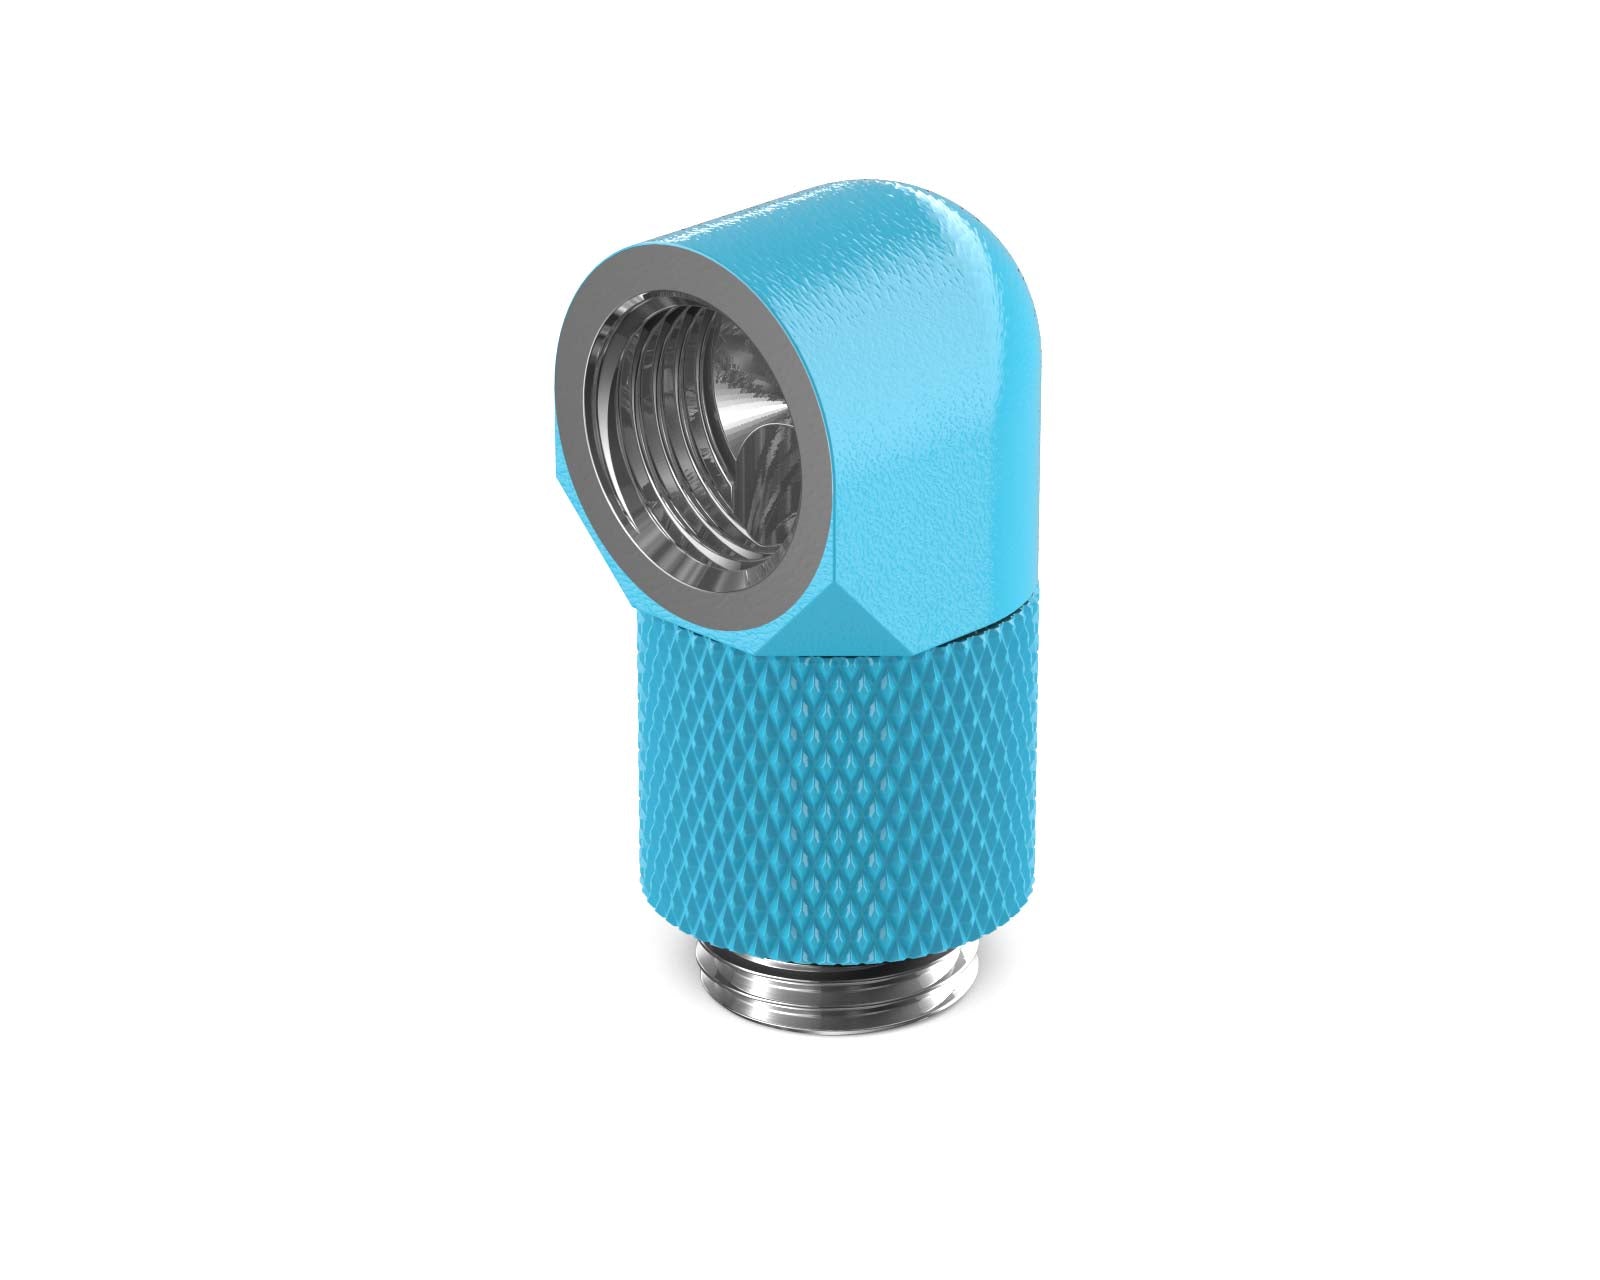 PrimoChill Male to Female G 1/4in. 90 Degree SX Rotary 15mm Extension Elbow Fitting - PrimoChill - KEEPING IT COOL Sky Blue